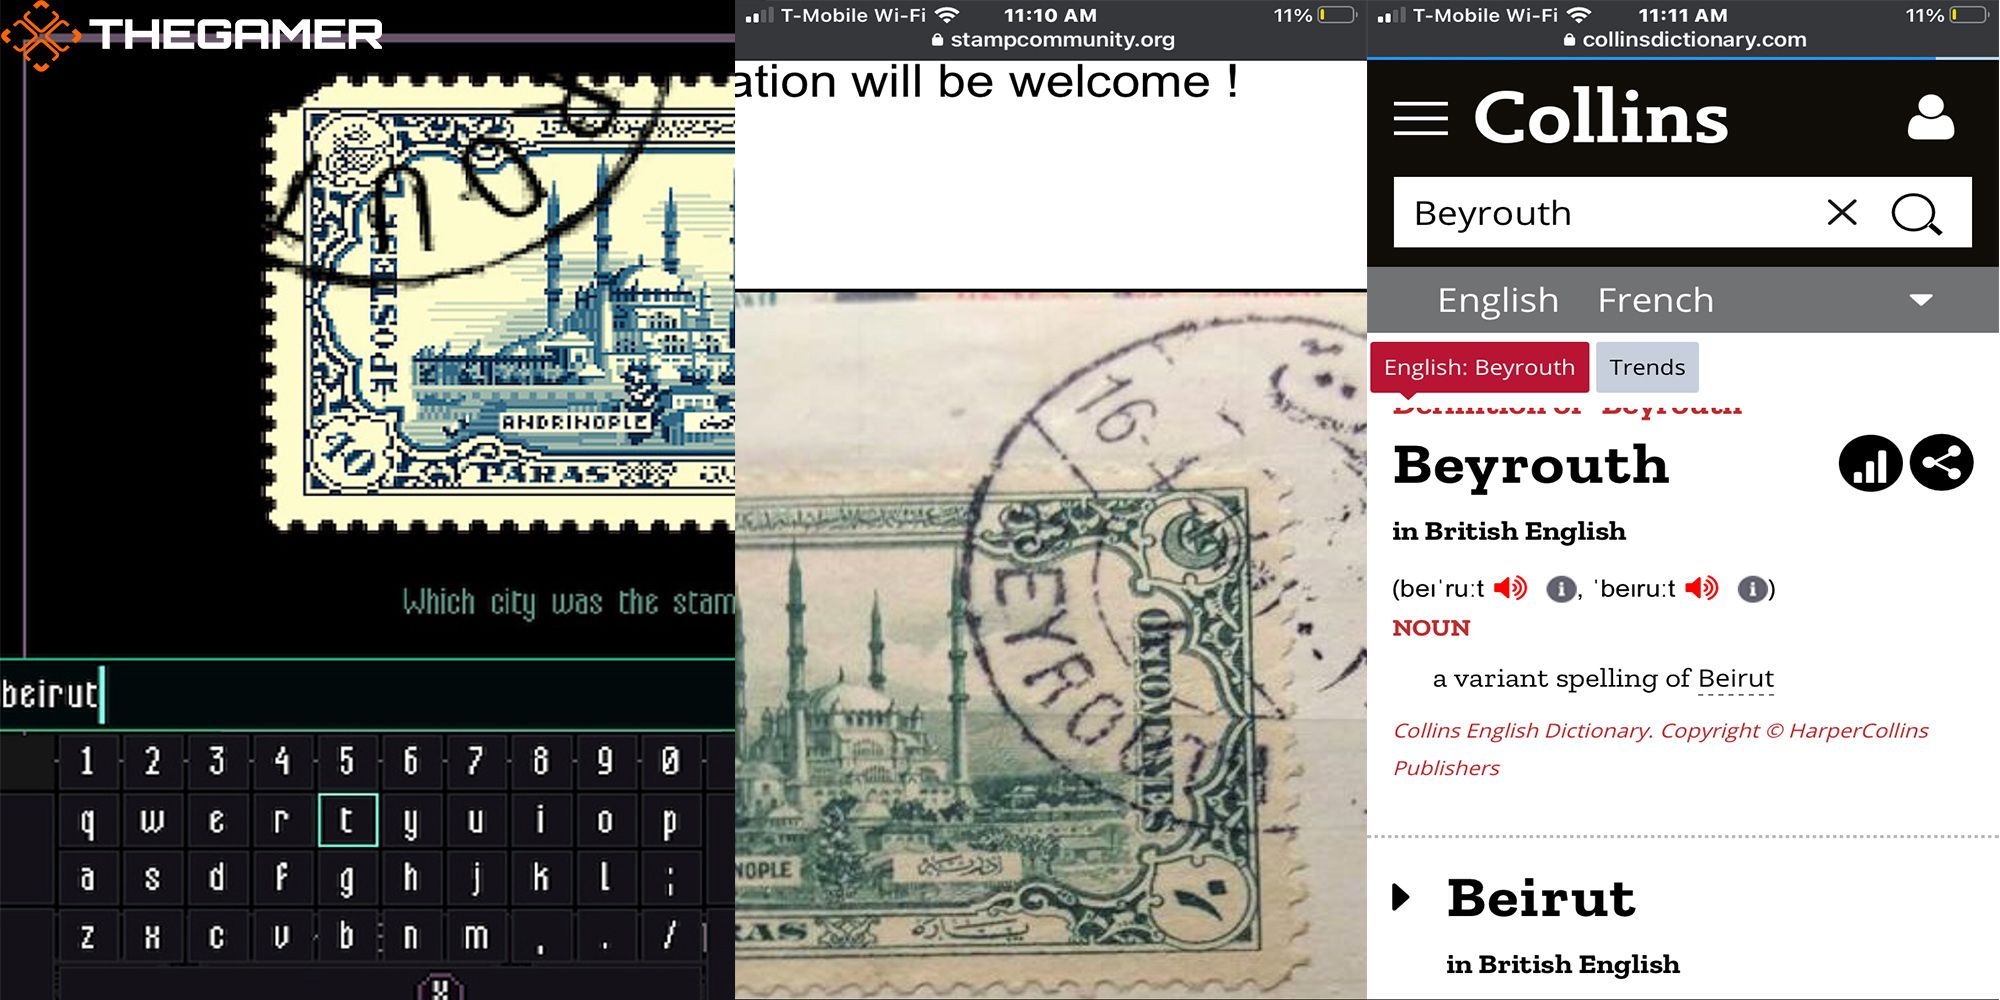 Two separate google searches indicate that the Ottoman Empire stamp is from Beirut in Chinatown Detective Agency.